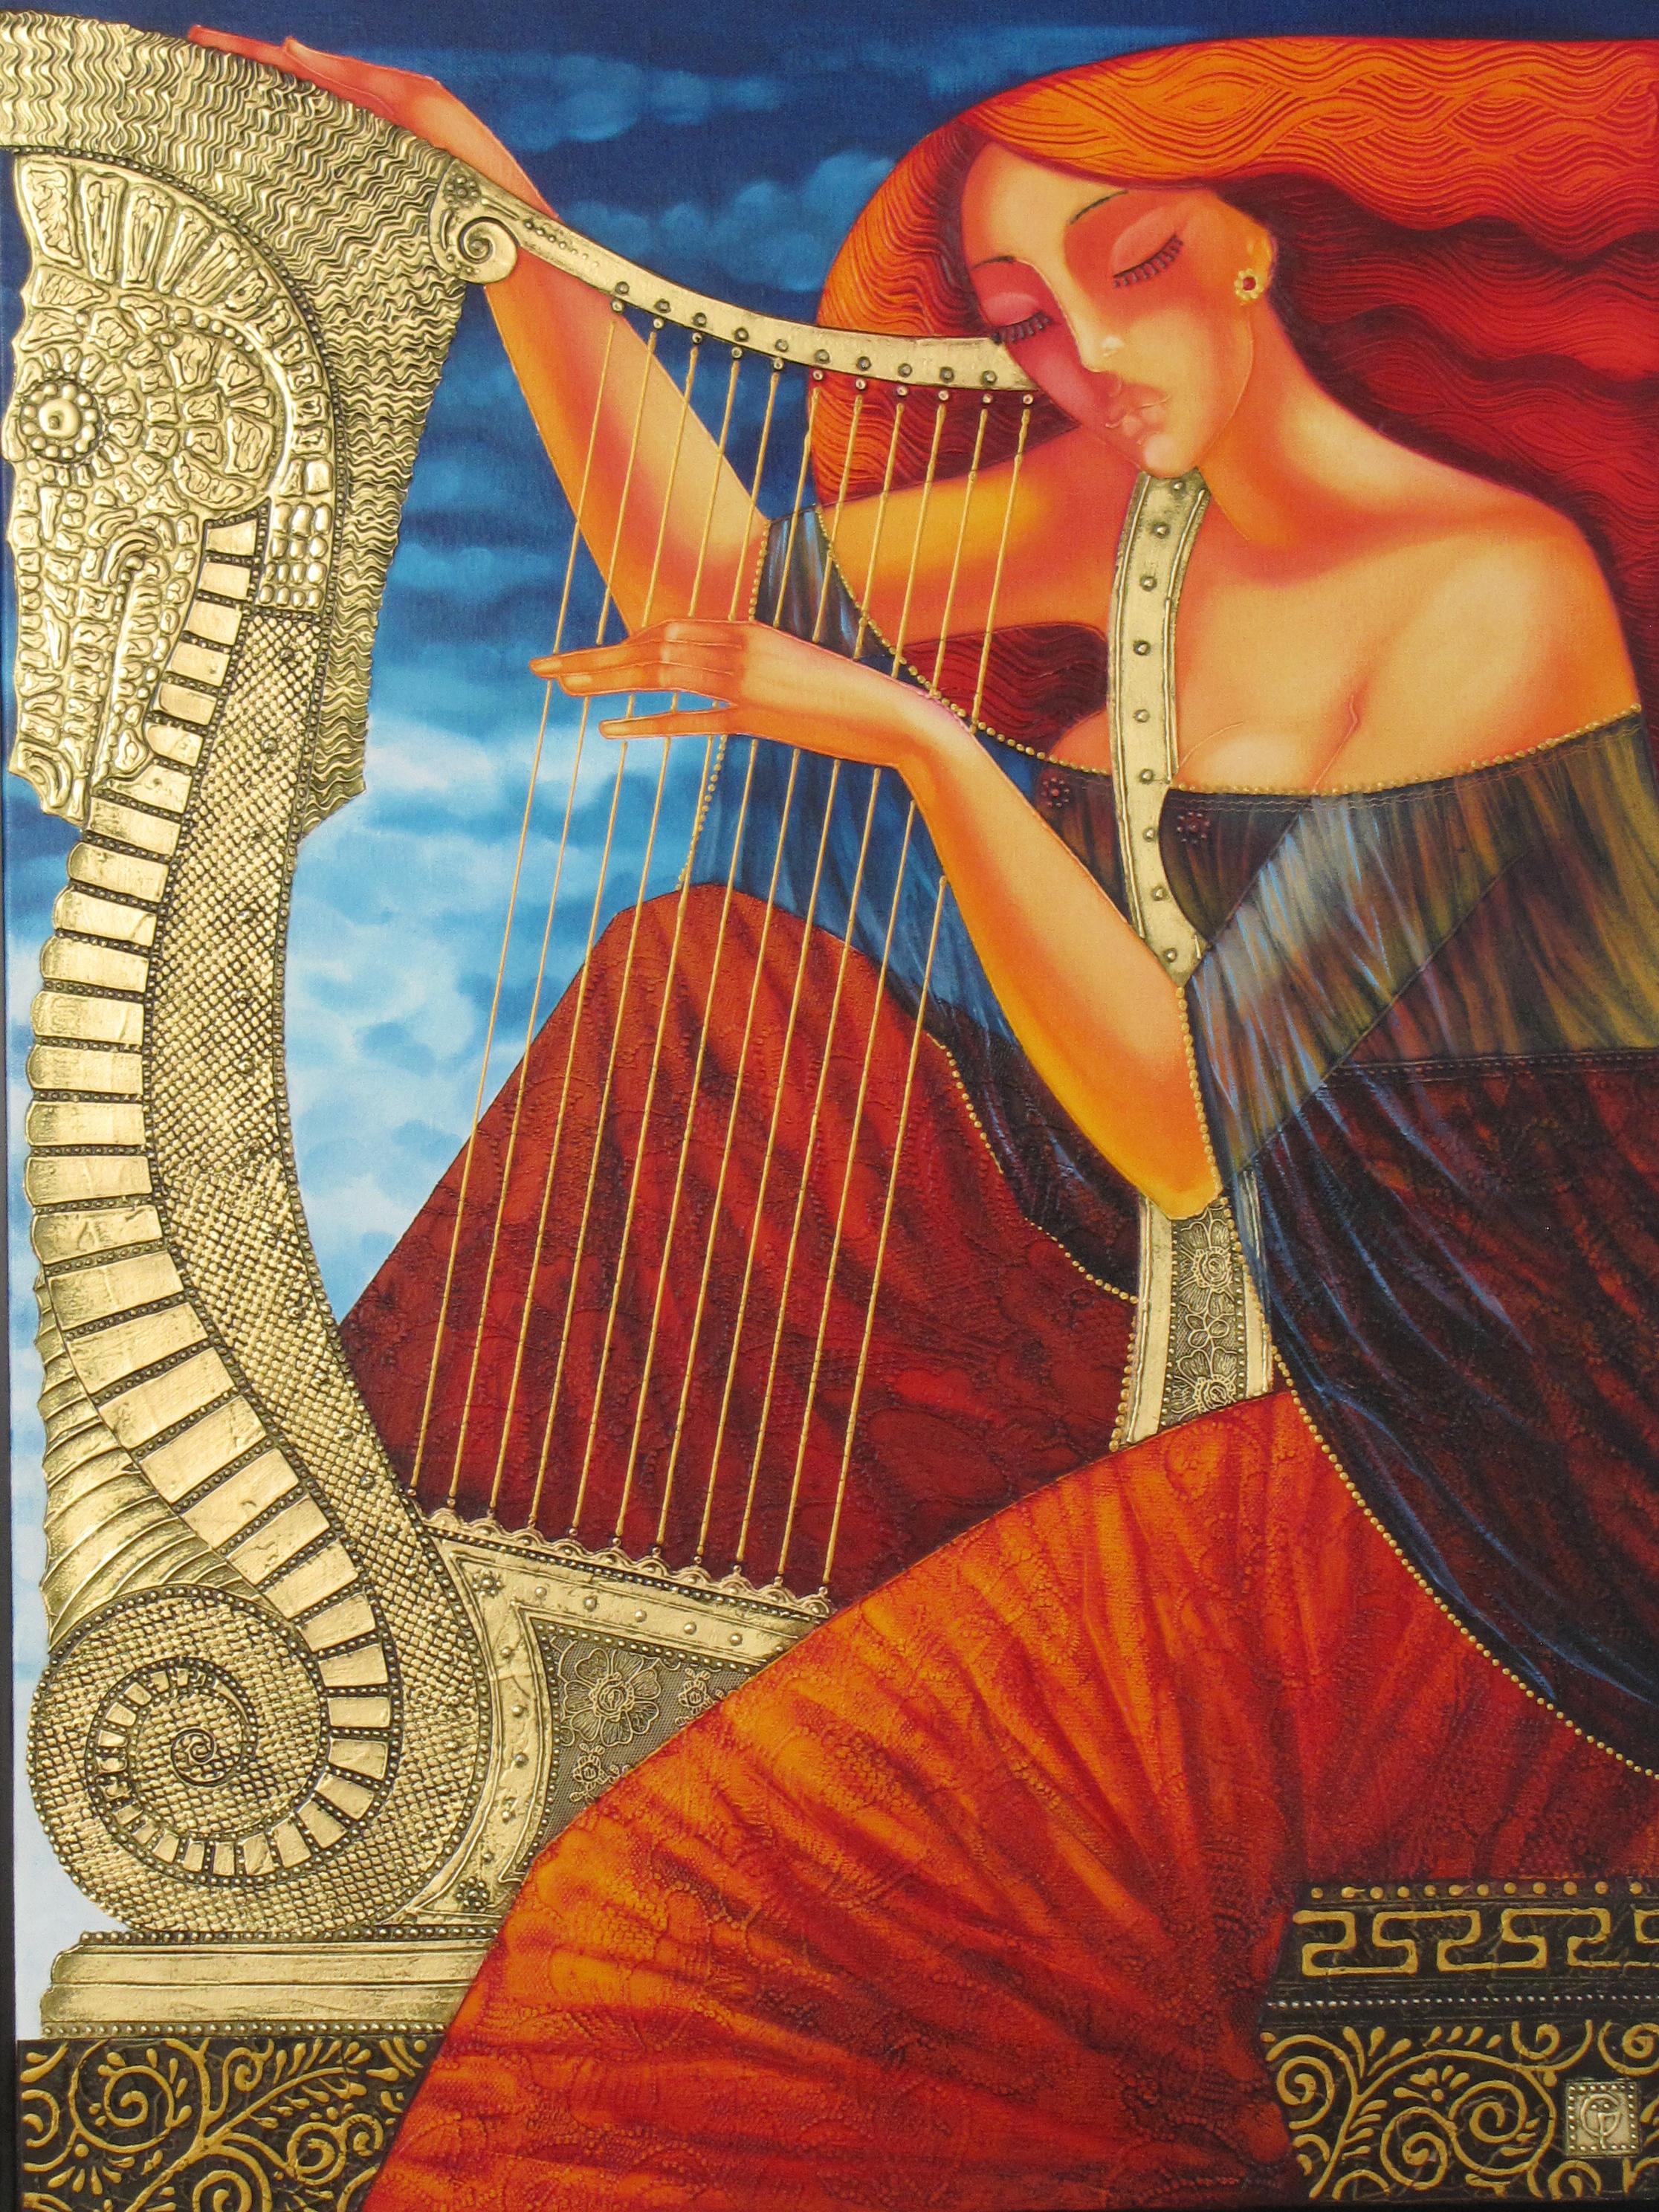 Stefano Georges Figurative Painting – Celestial Harp